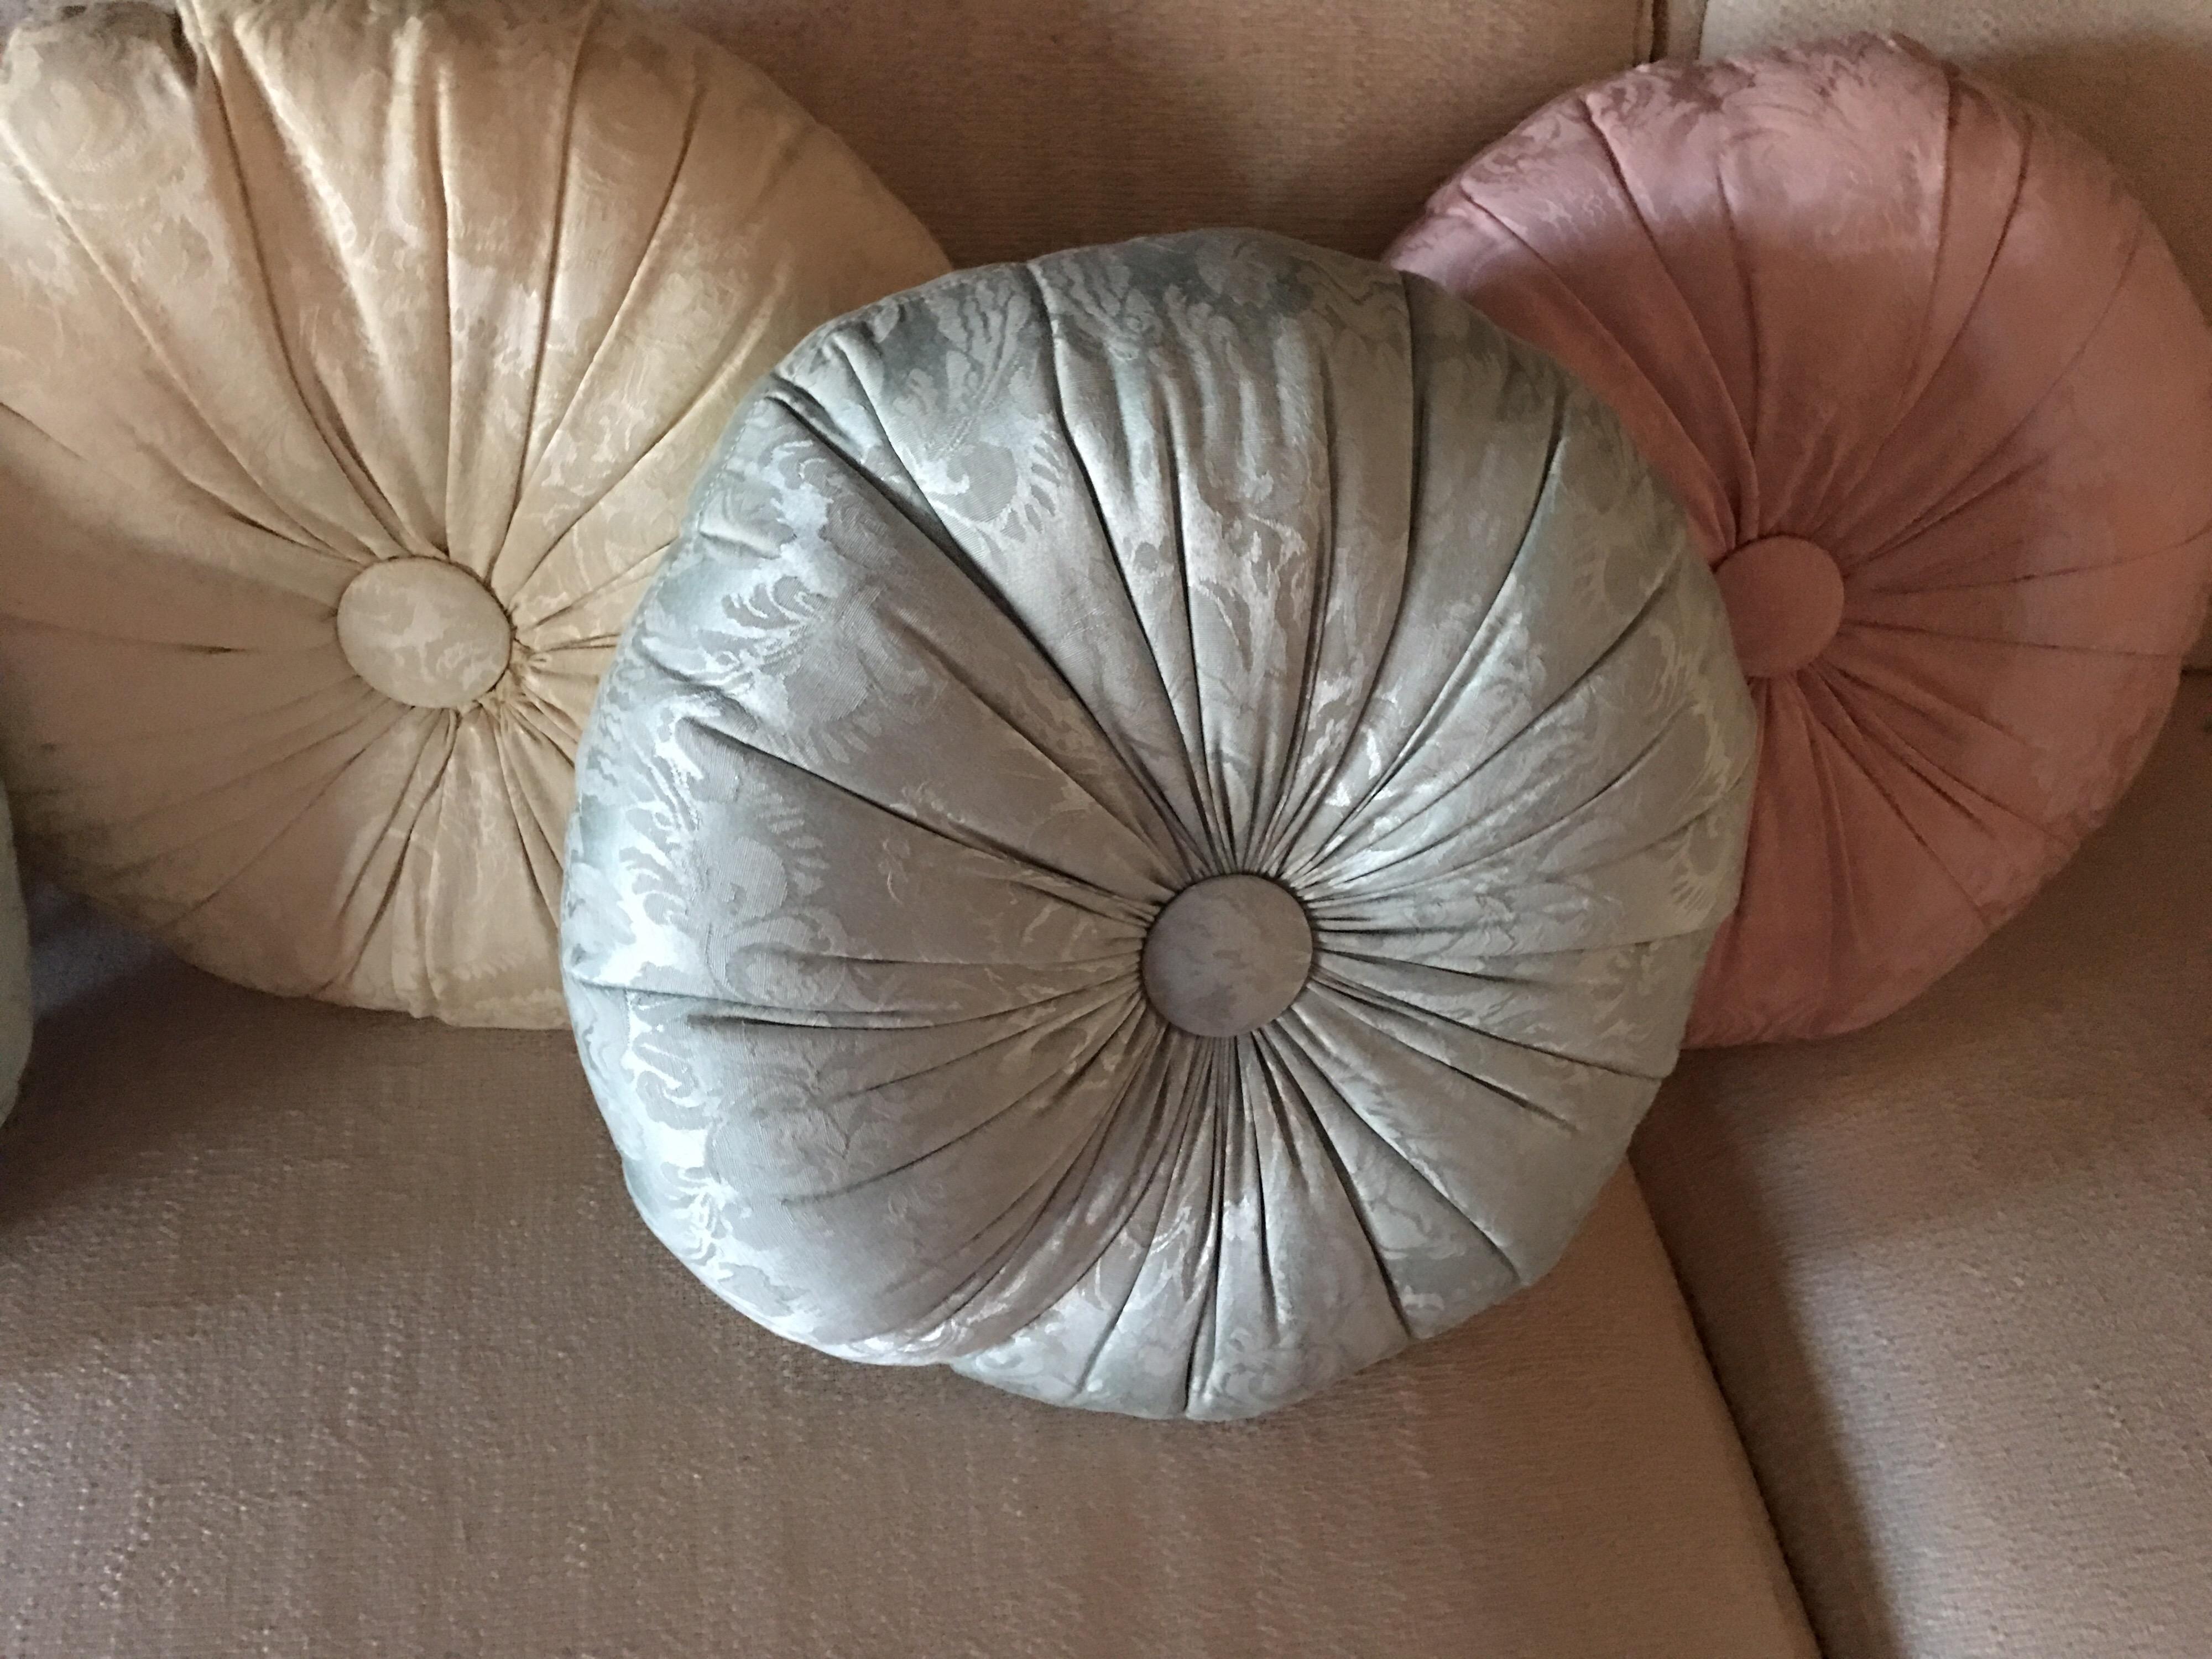 A custom made set of five designer pillows made for a Palm Springs Estate but never used. Done in the style of a vintage French boudoir, they were made in a high-end beautiful pastel jacquard. Set of five includes two blush pink, to light aqua, and